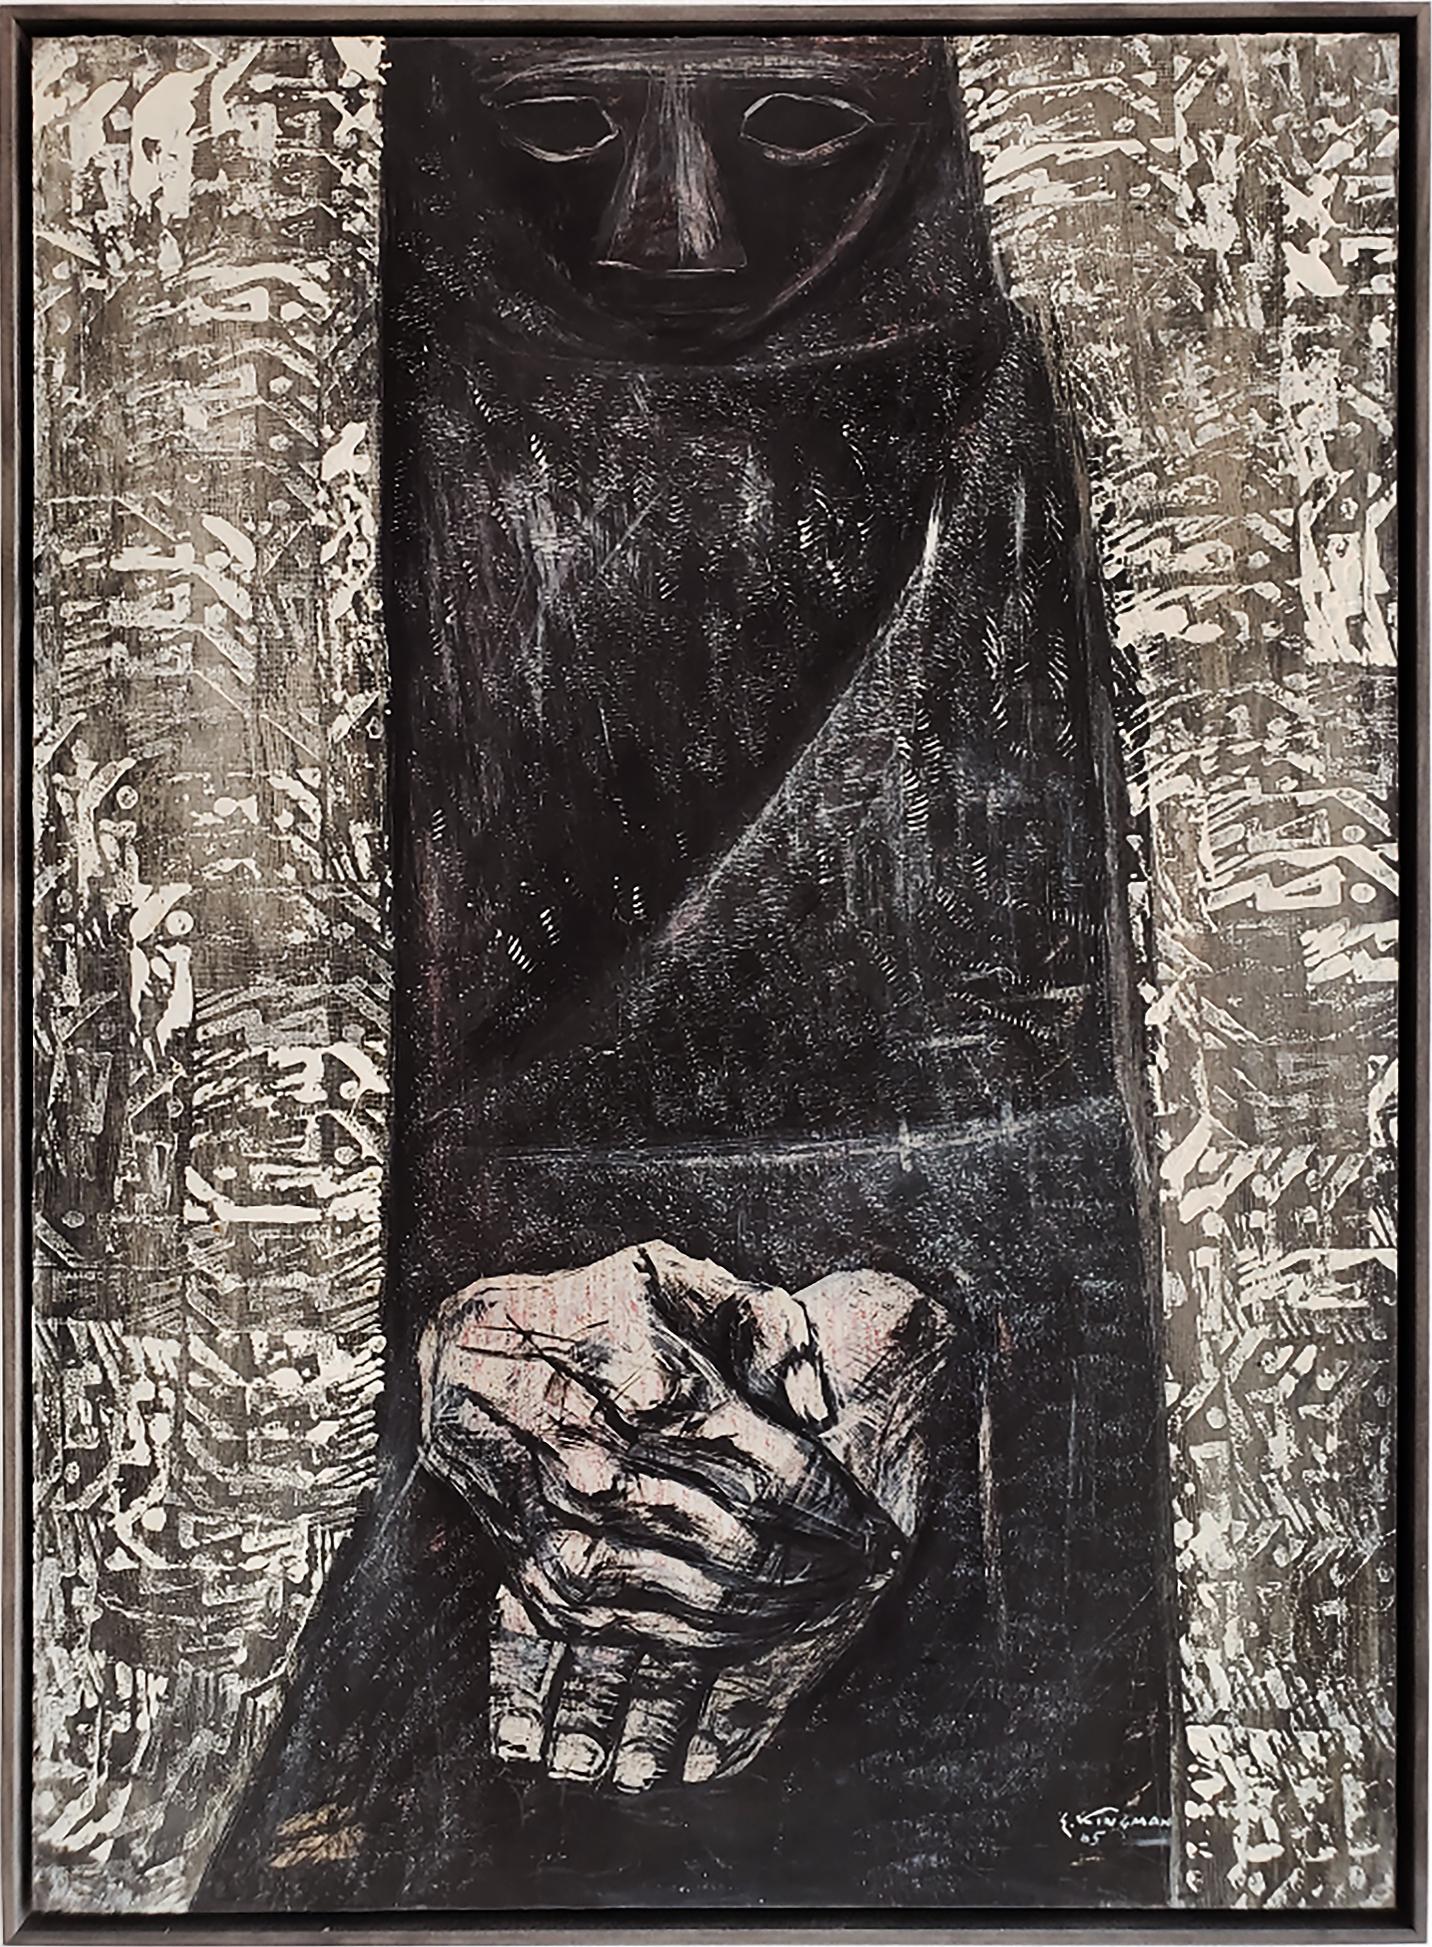 Untitled - Mysterious Figure in Black Pancho and Expressive Hands - Painting by Eduardo Kingman